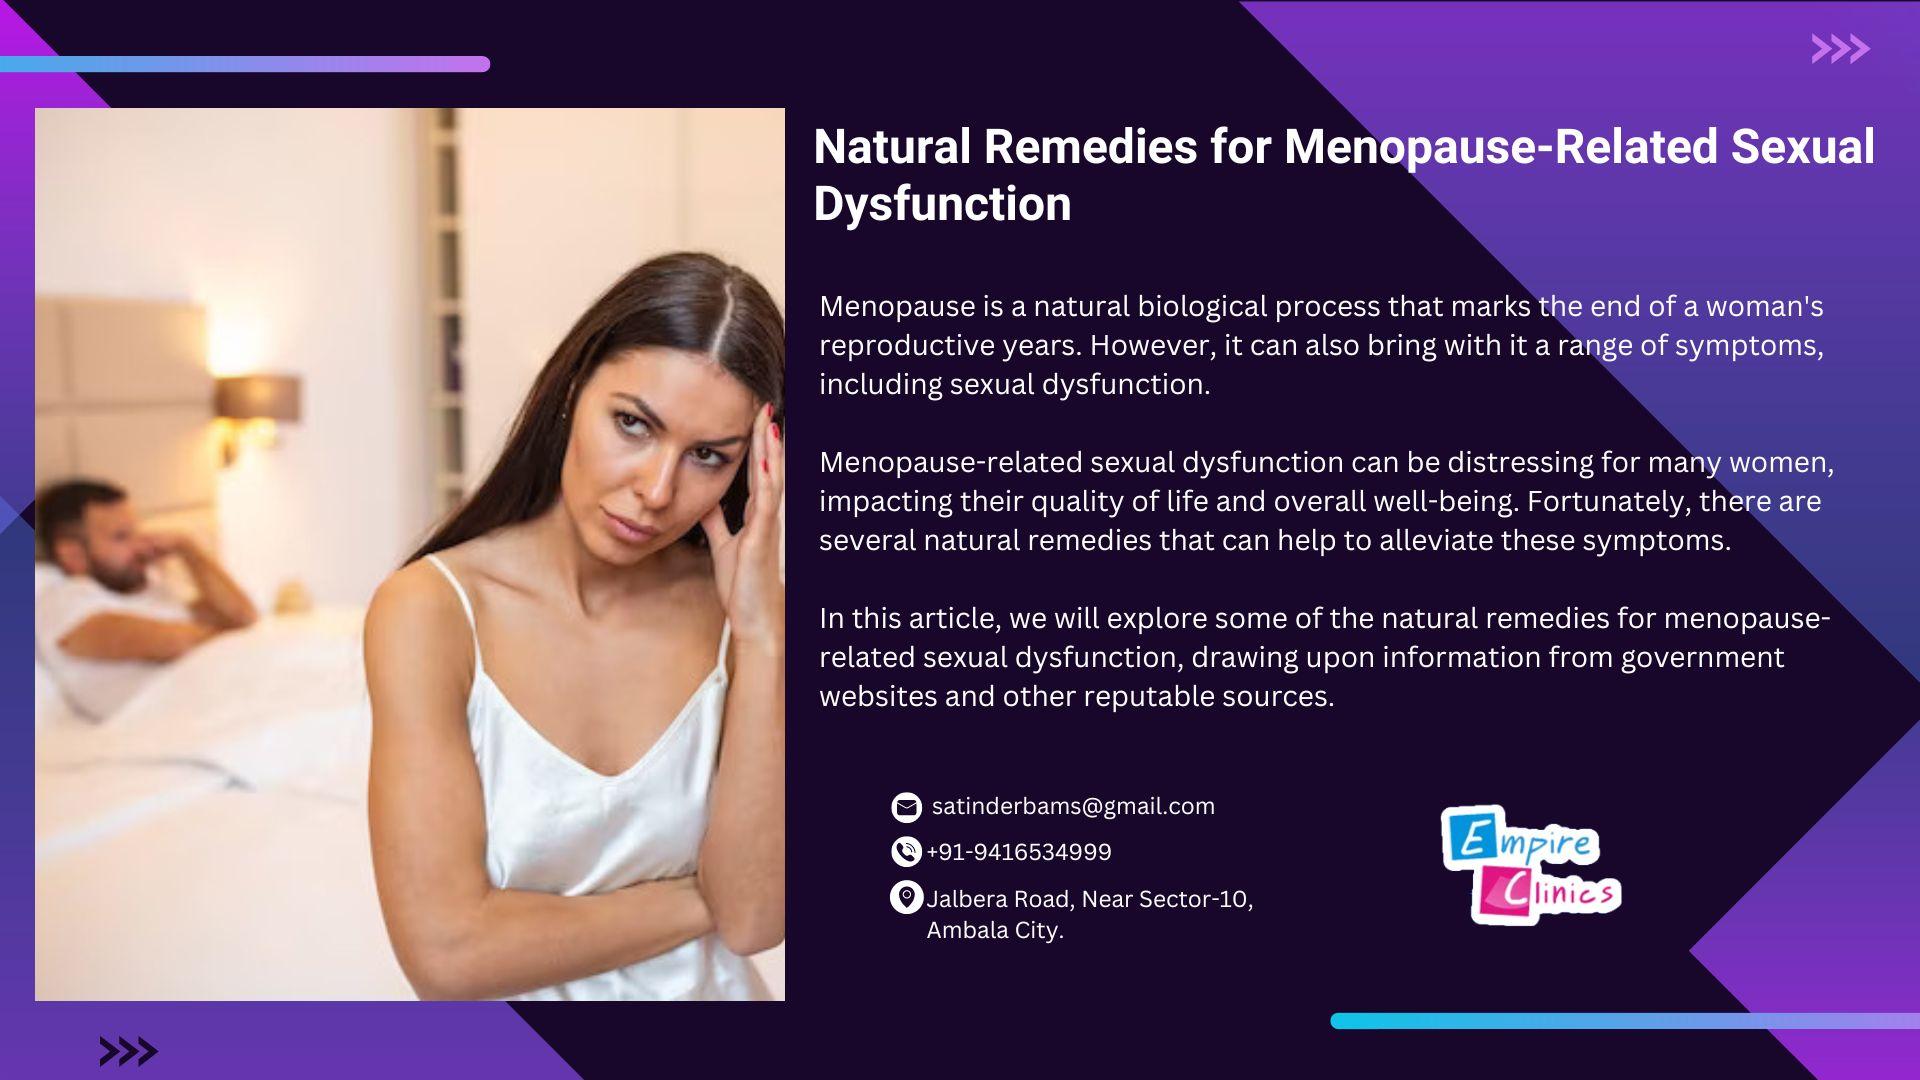 Natural Remedies for Menopause-Related Sexual Dysfunction